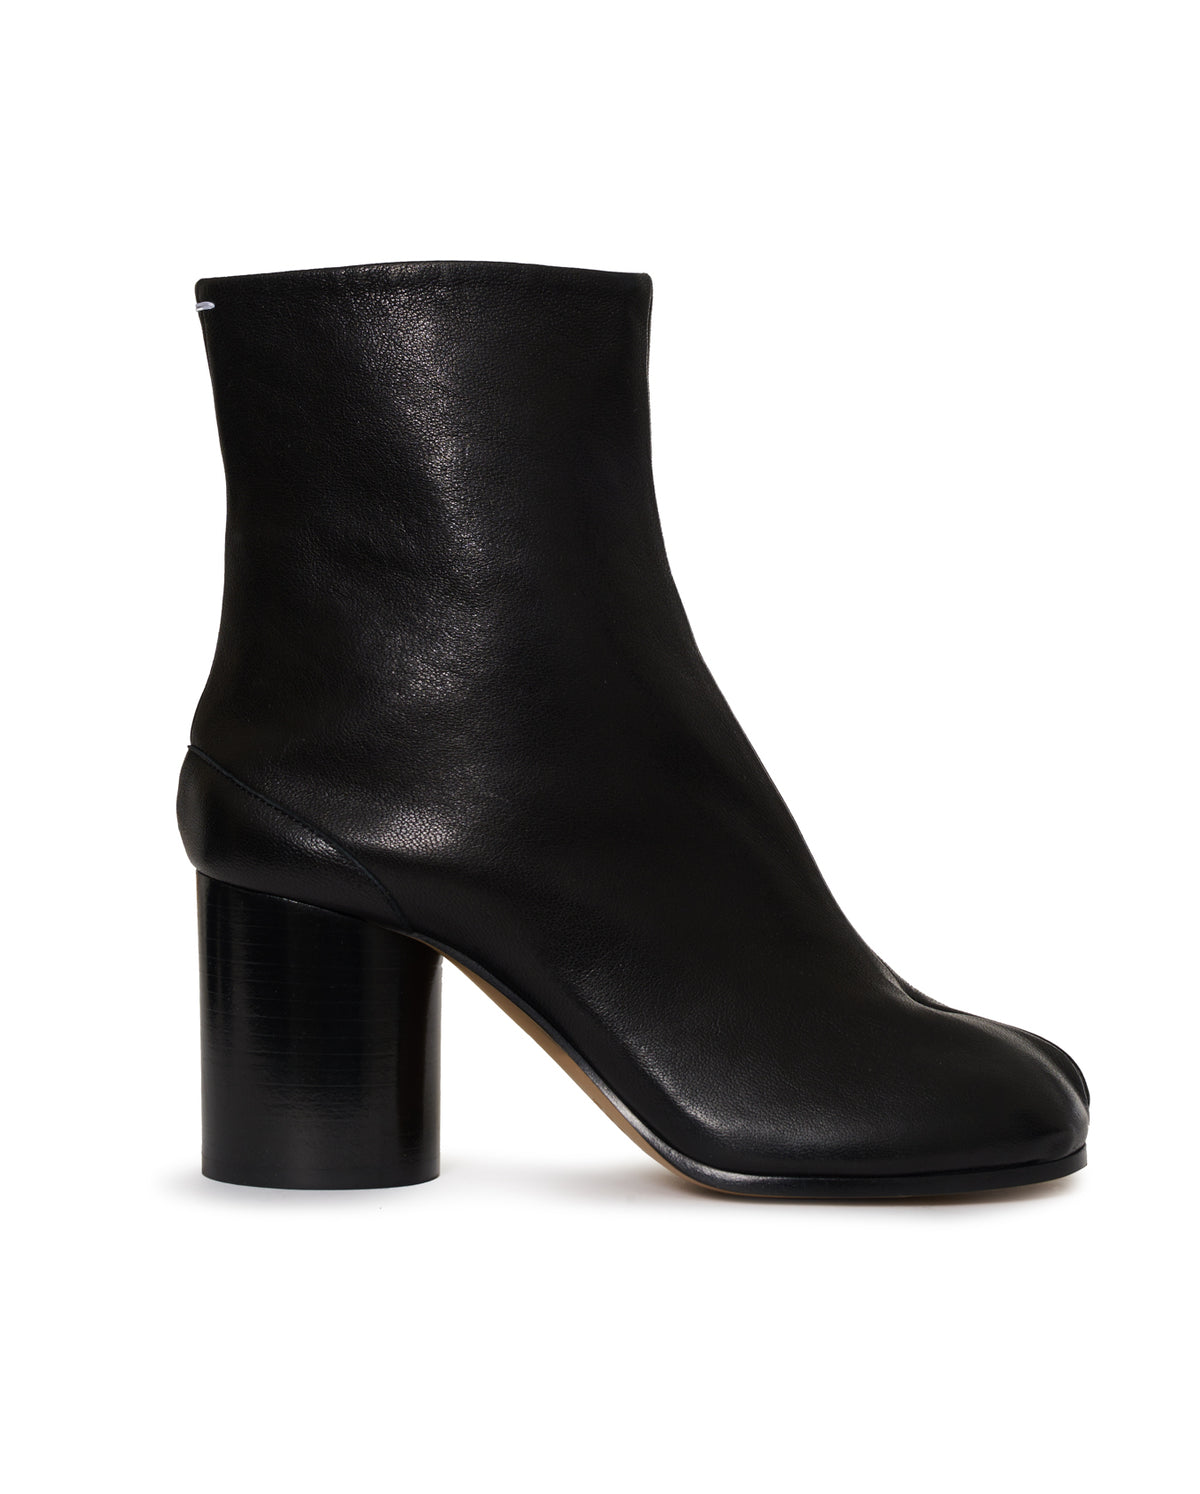 Tabi Ankle Boots H80 - Black